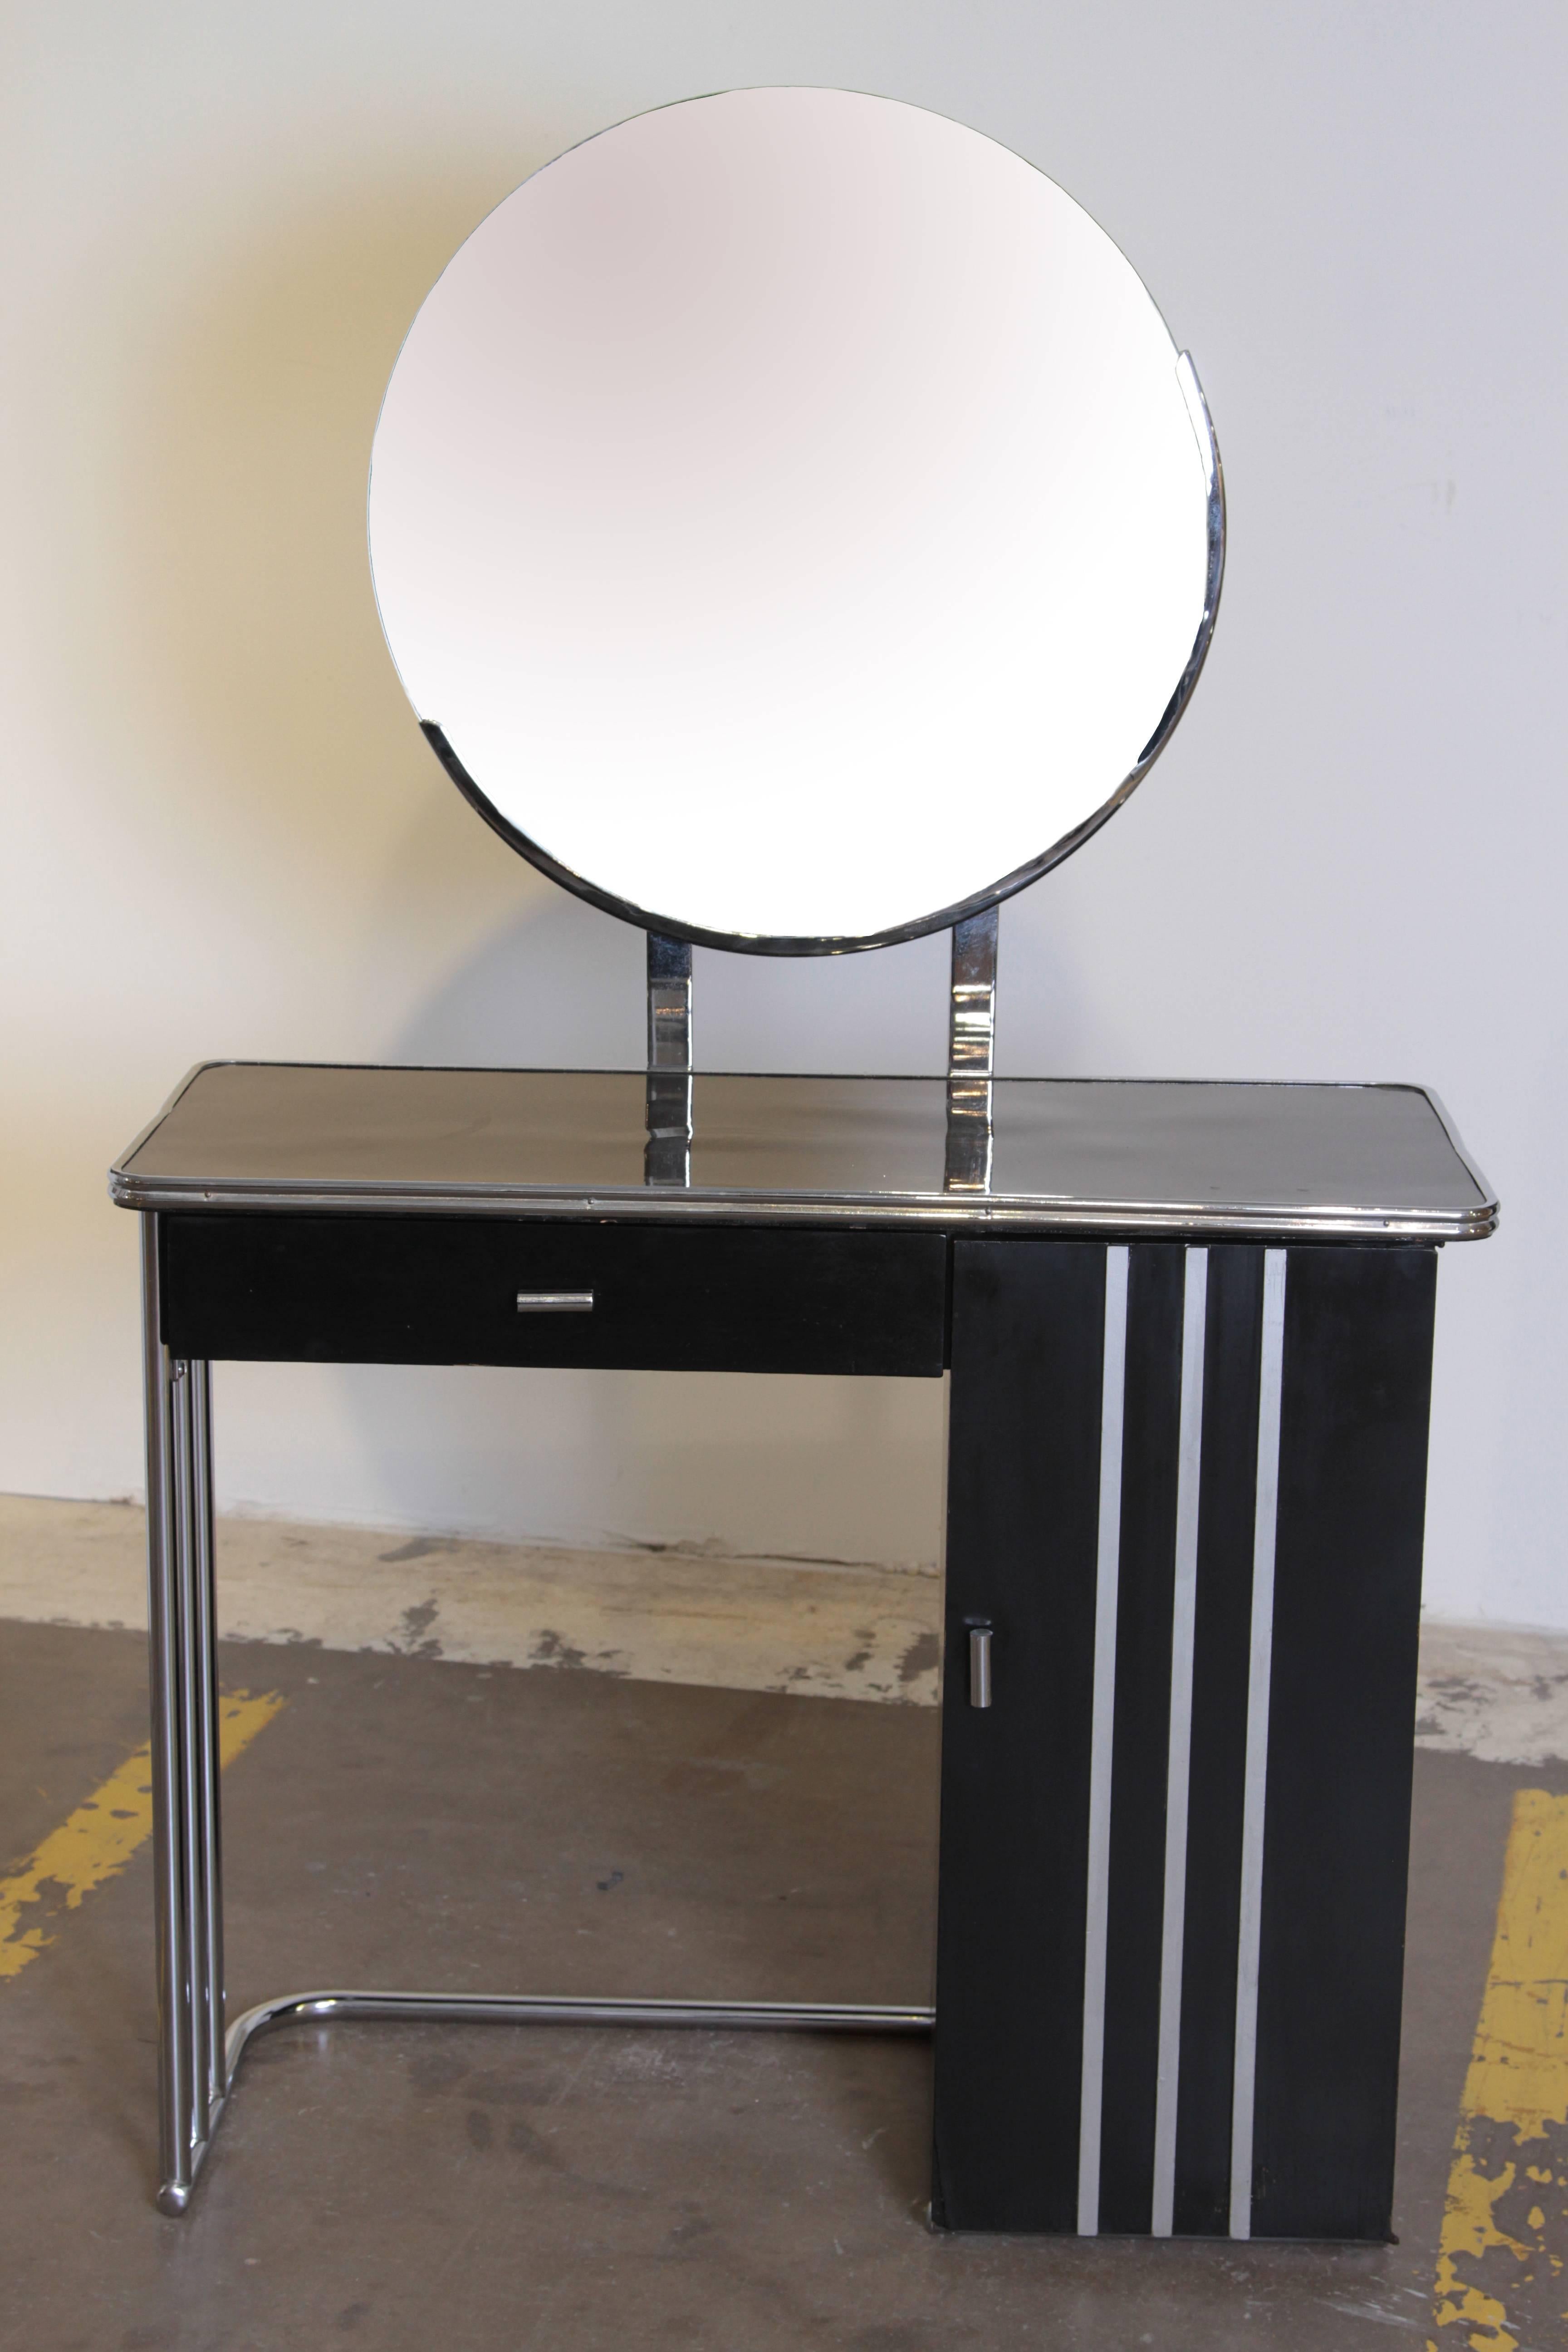 Machine Age Art Deco royal chrome dressing table # 347 by Royal Metal.  Royal Chrome.  Moderne.  Modernist.
Nice streamline speed lines.
Some attribute this design to Donald Deskey, unconfirmed, but from Royal's Michigan City, Indiana